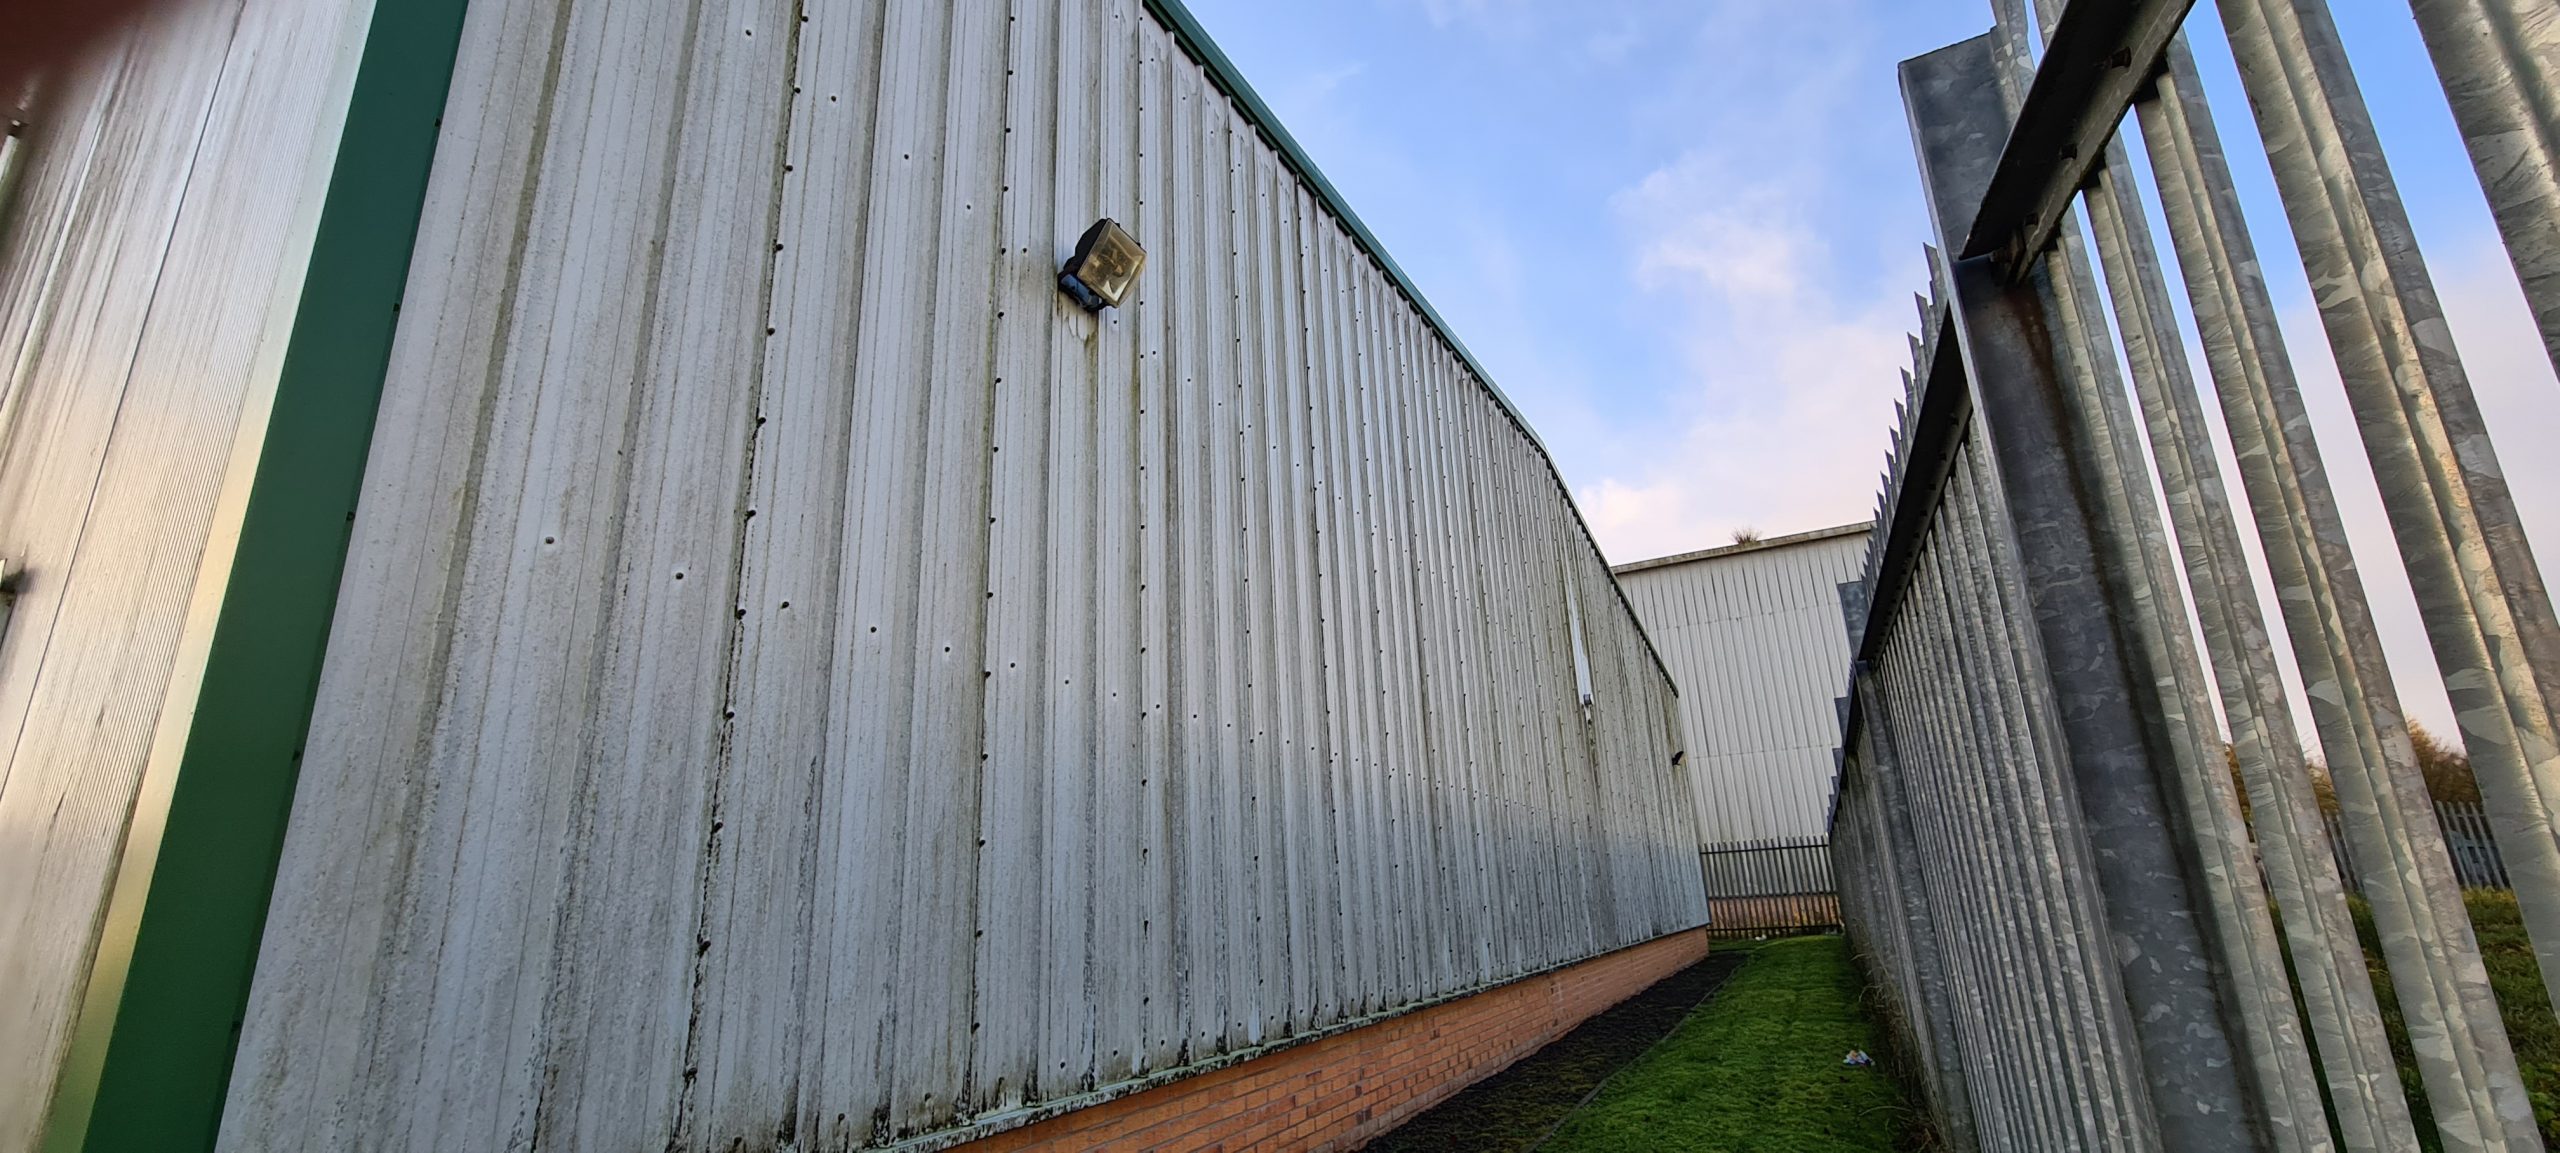 Cladding Cleaning Glasgow | Give your customers a great first impression.